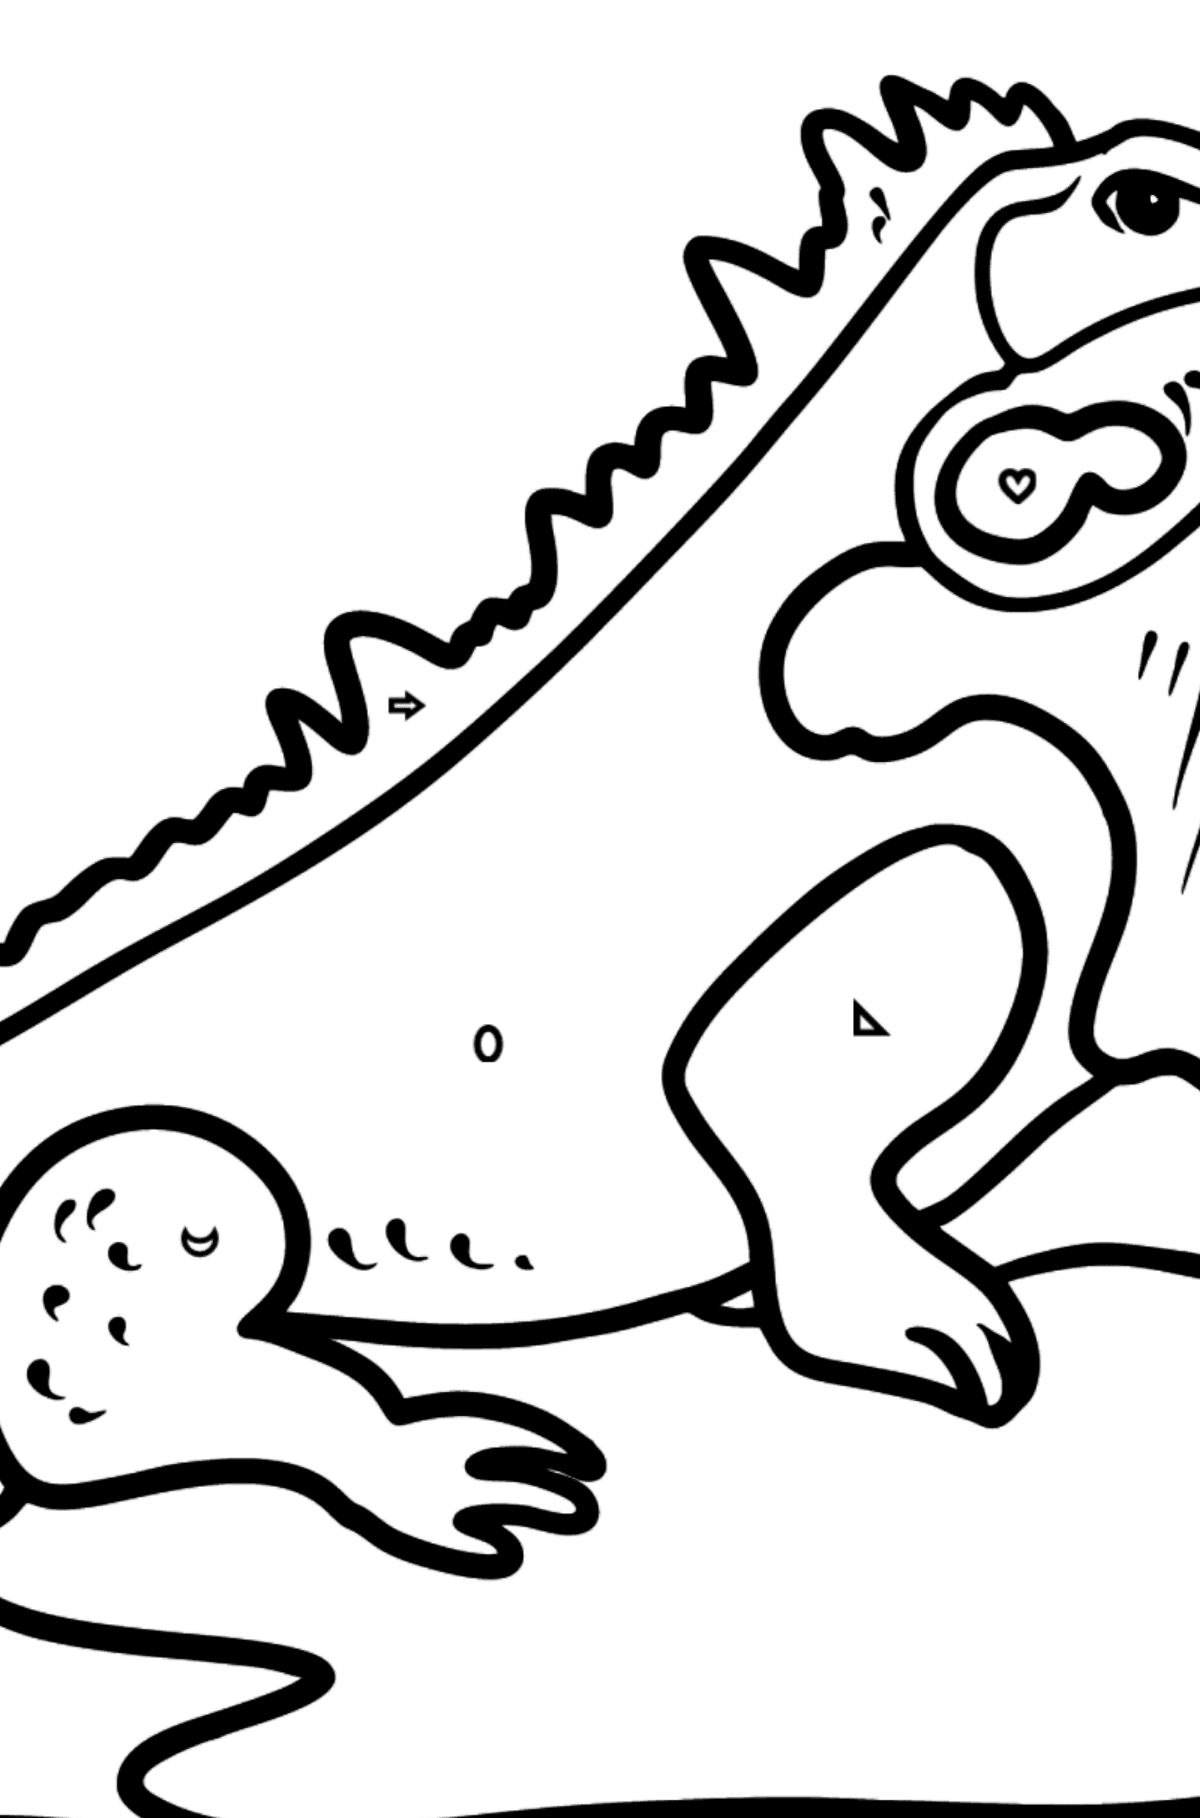 Spanish Letter I coloring pages - IGUANA - Coloring by Geometric Shapes for Kids